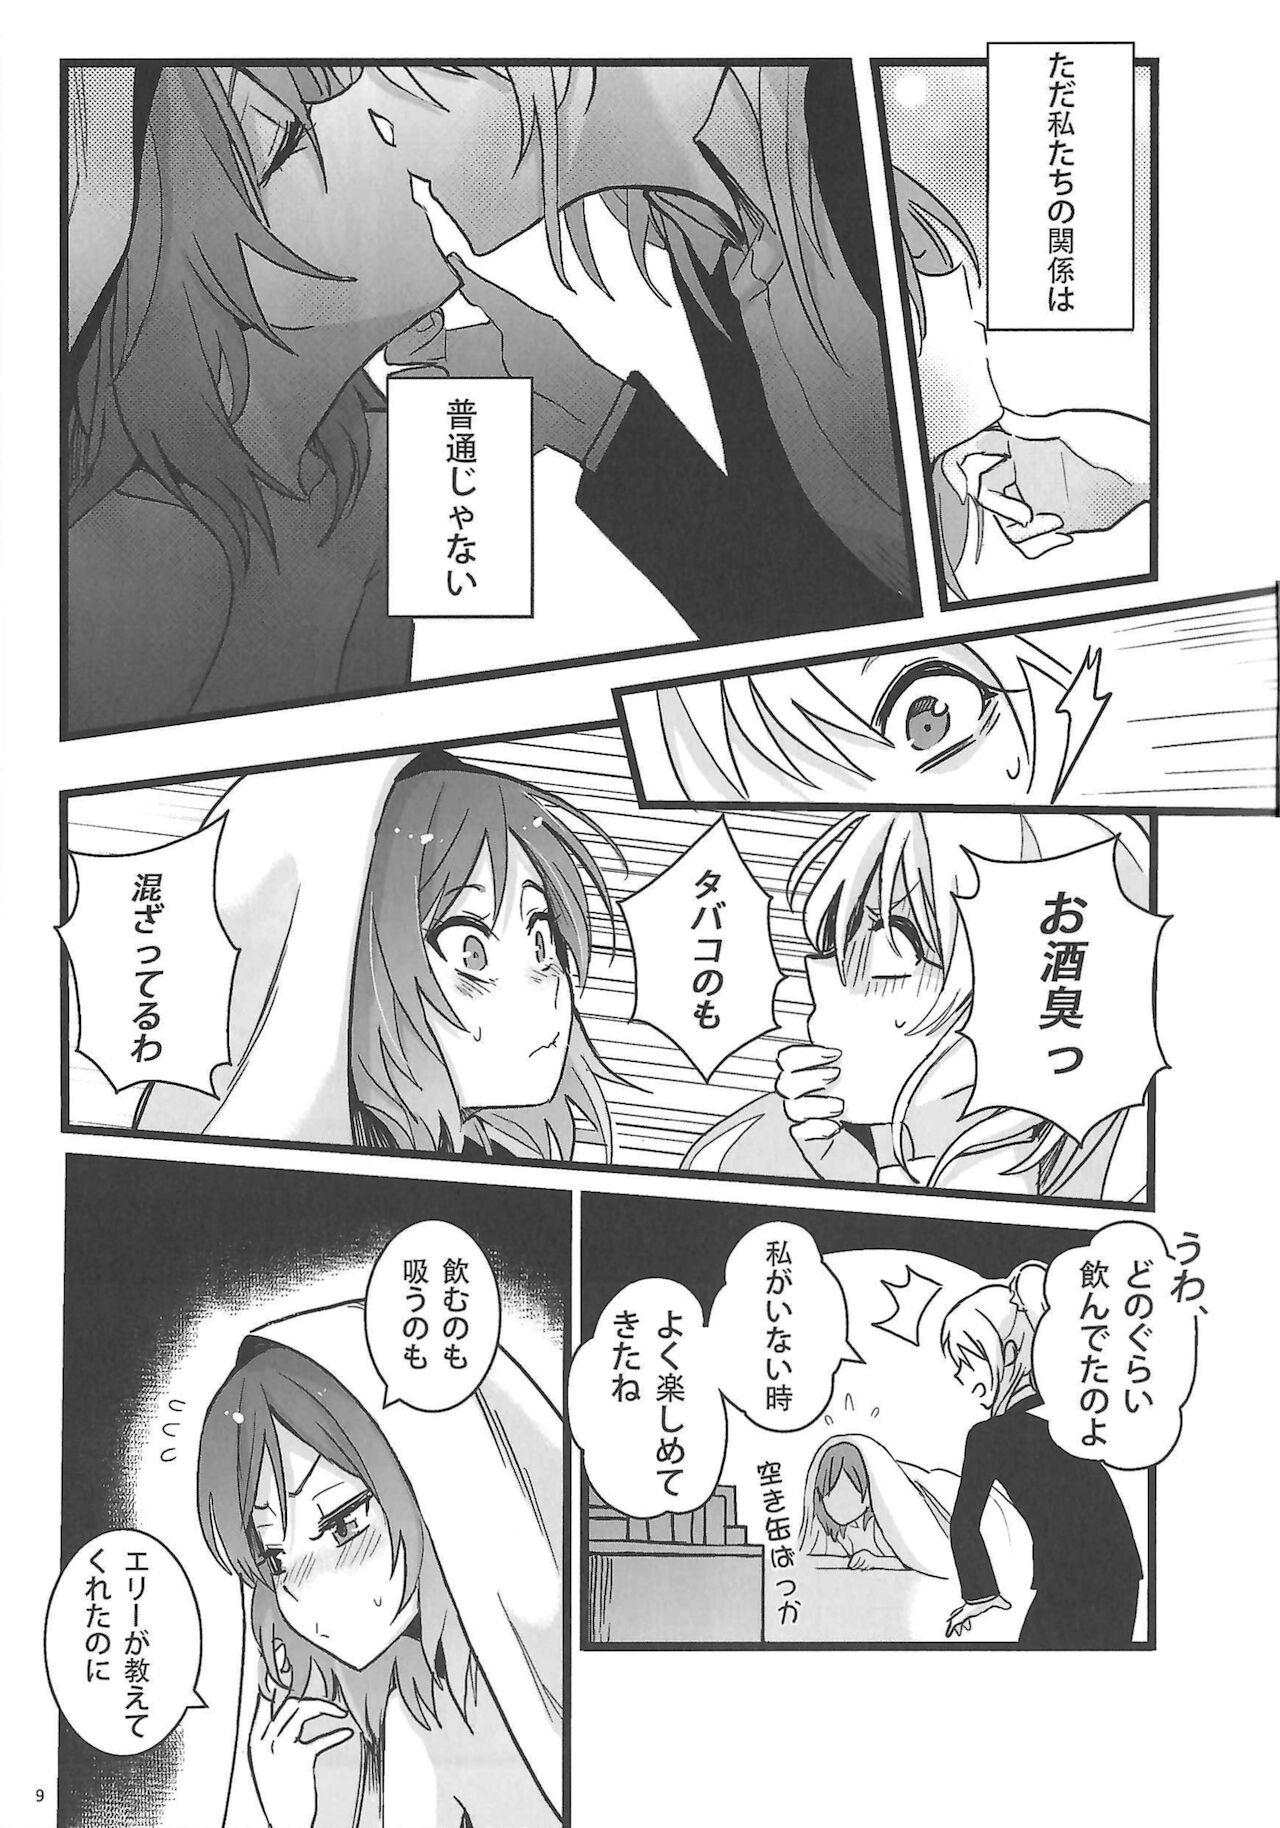 Bra Ode to Losers - Love live Men - Page 10